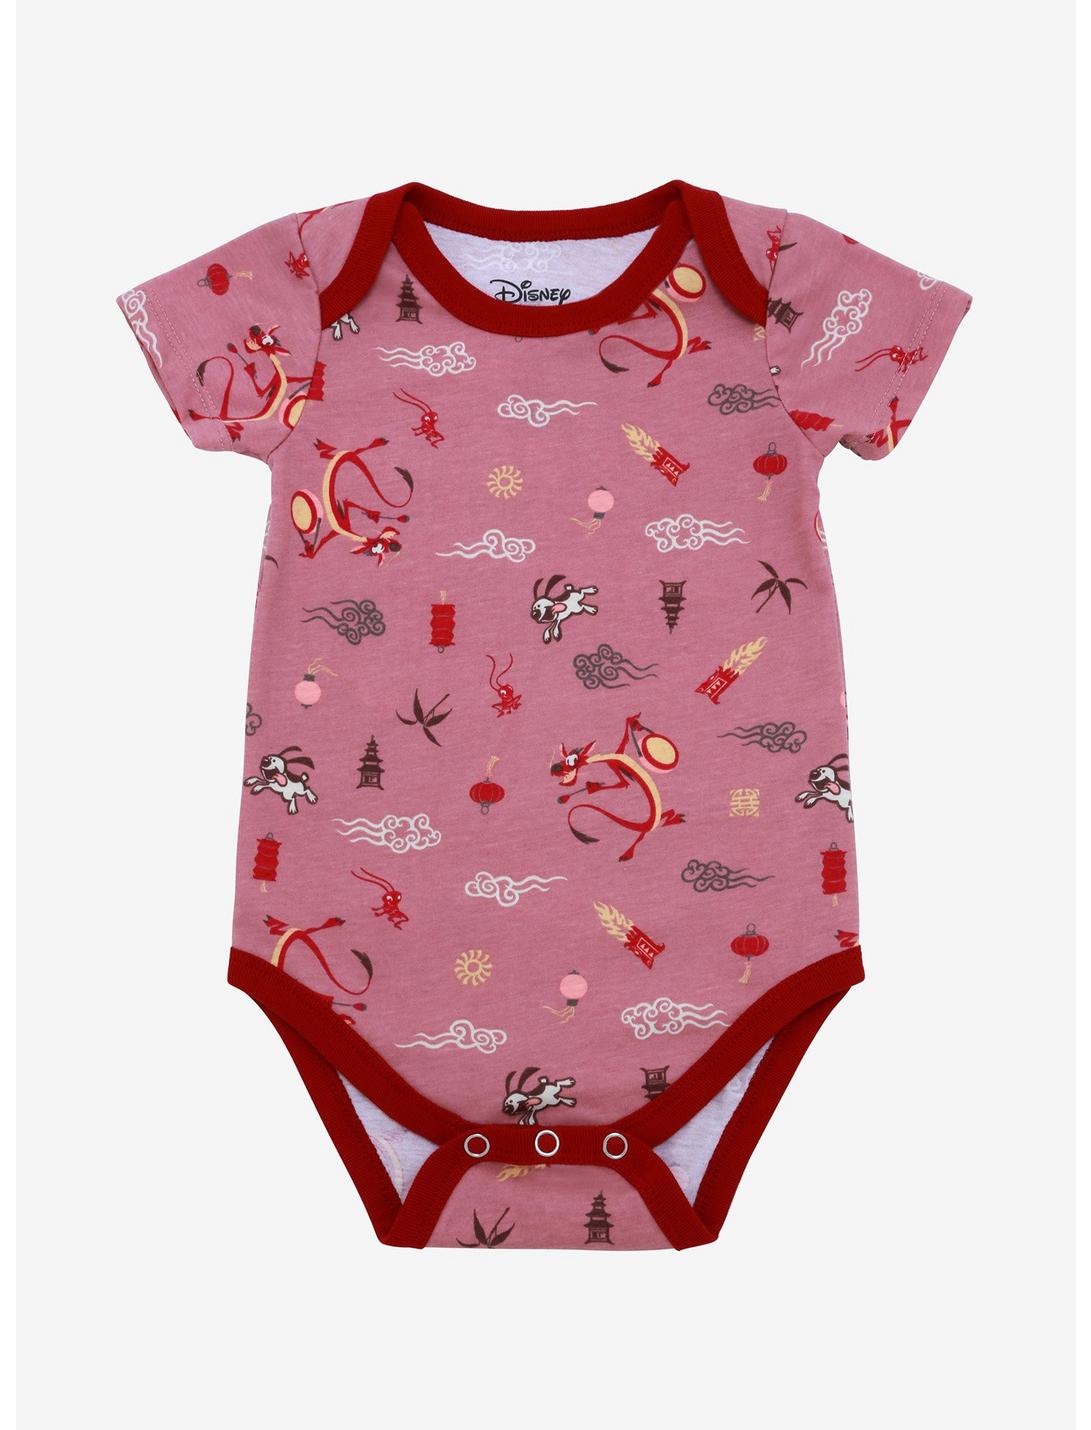 Our Universe Disney Mulan Mushu Allover Print Infant Bodysuit - BoxLunch Exclusive, RED, hi-res